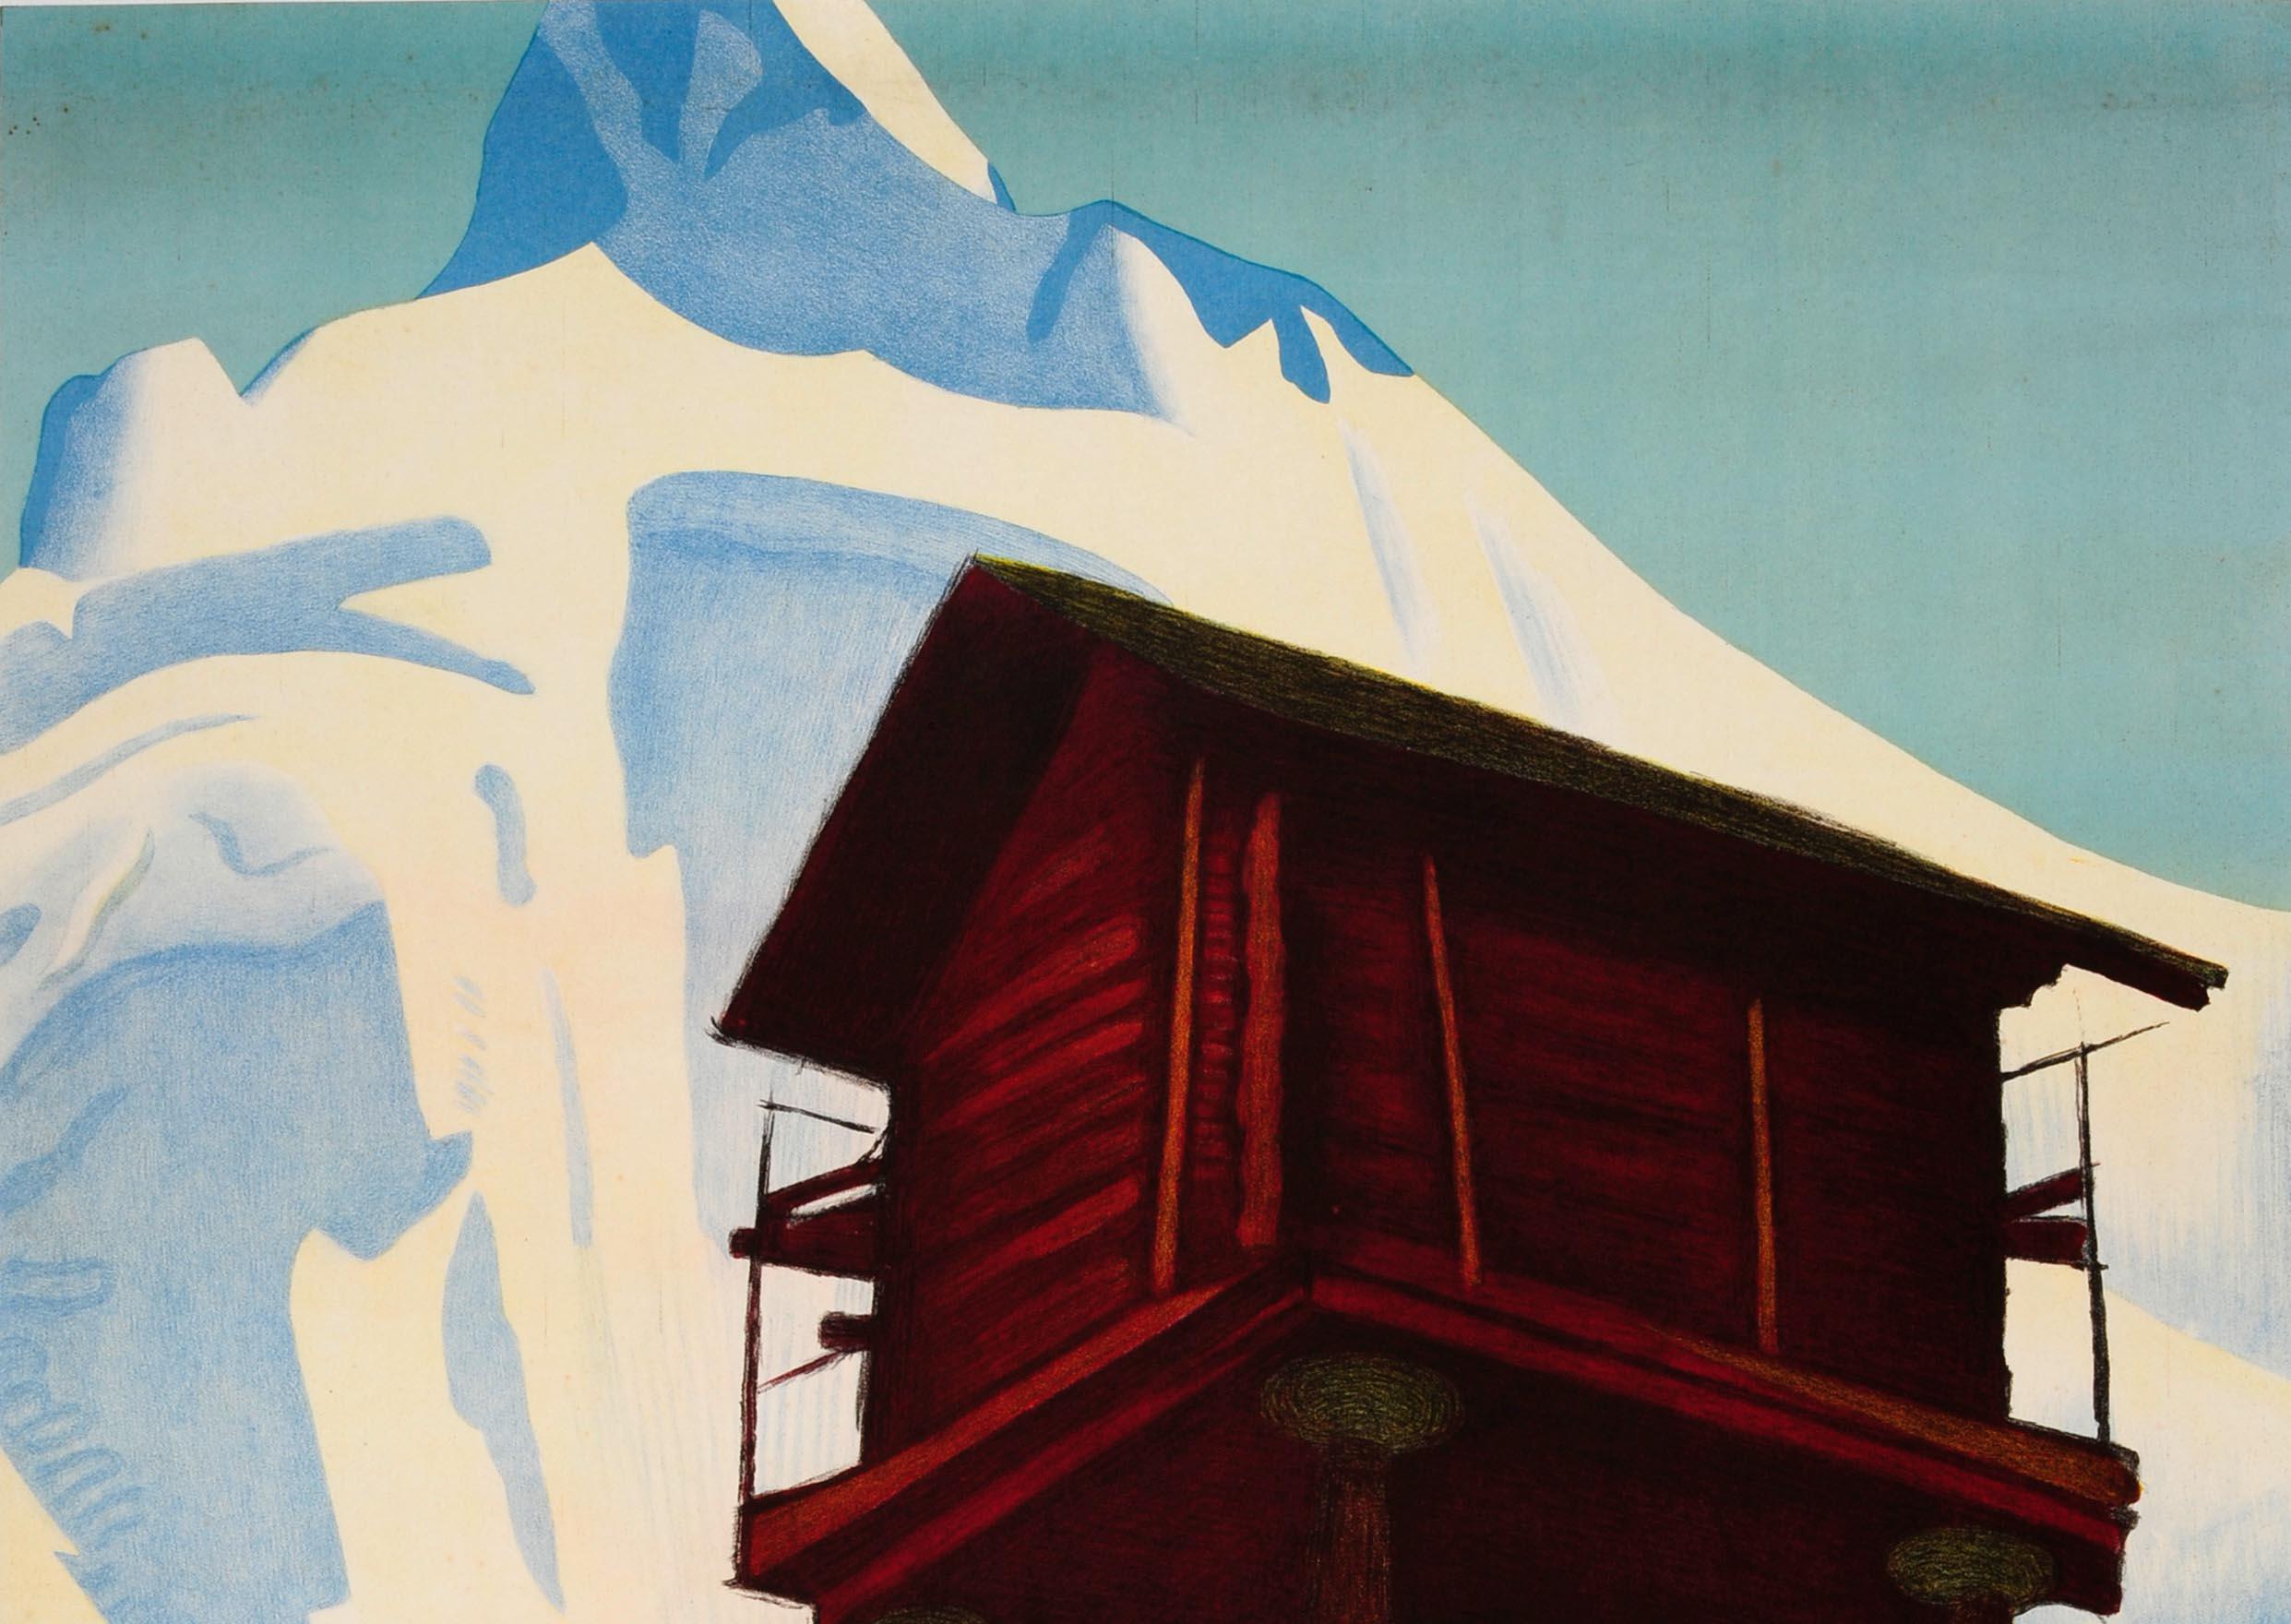 Original vintage travel advertising poster issued to promote the canton of Valais, the home of the popular ski resorts of Verbier and Zermatt, featuring a picturesque scene by Erich Hermes (1881-1971) depicting a snowy mountain resembling the